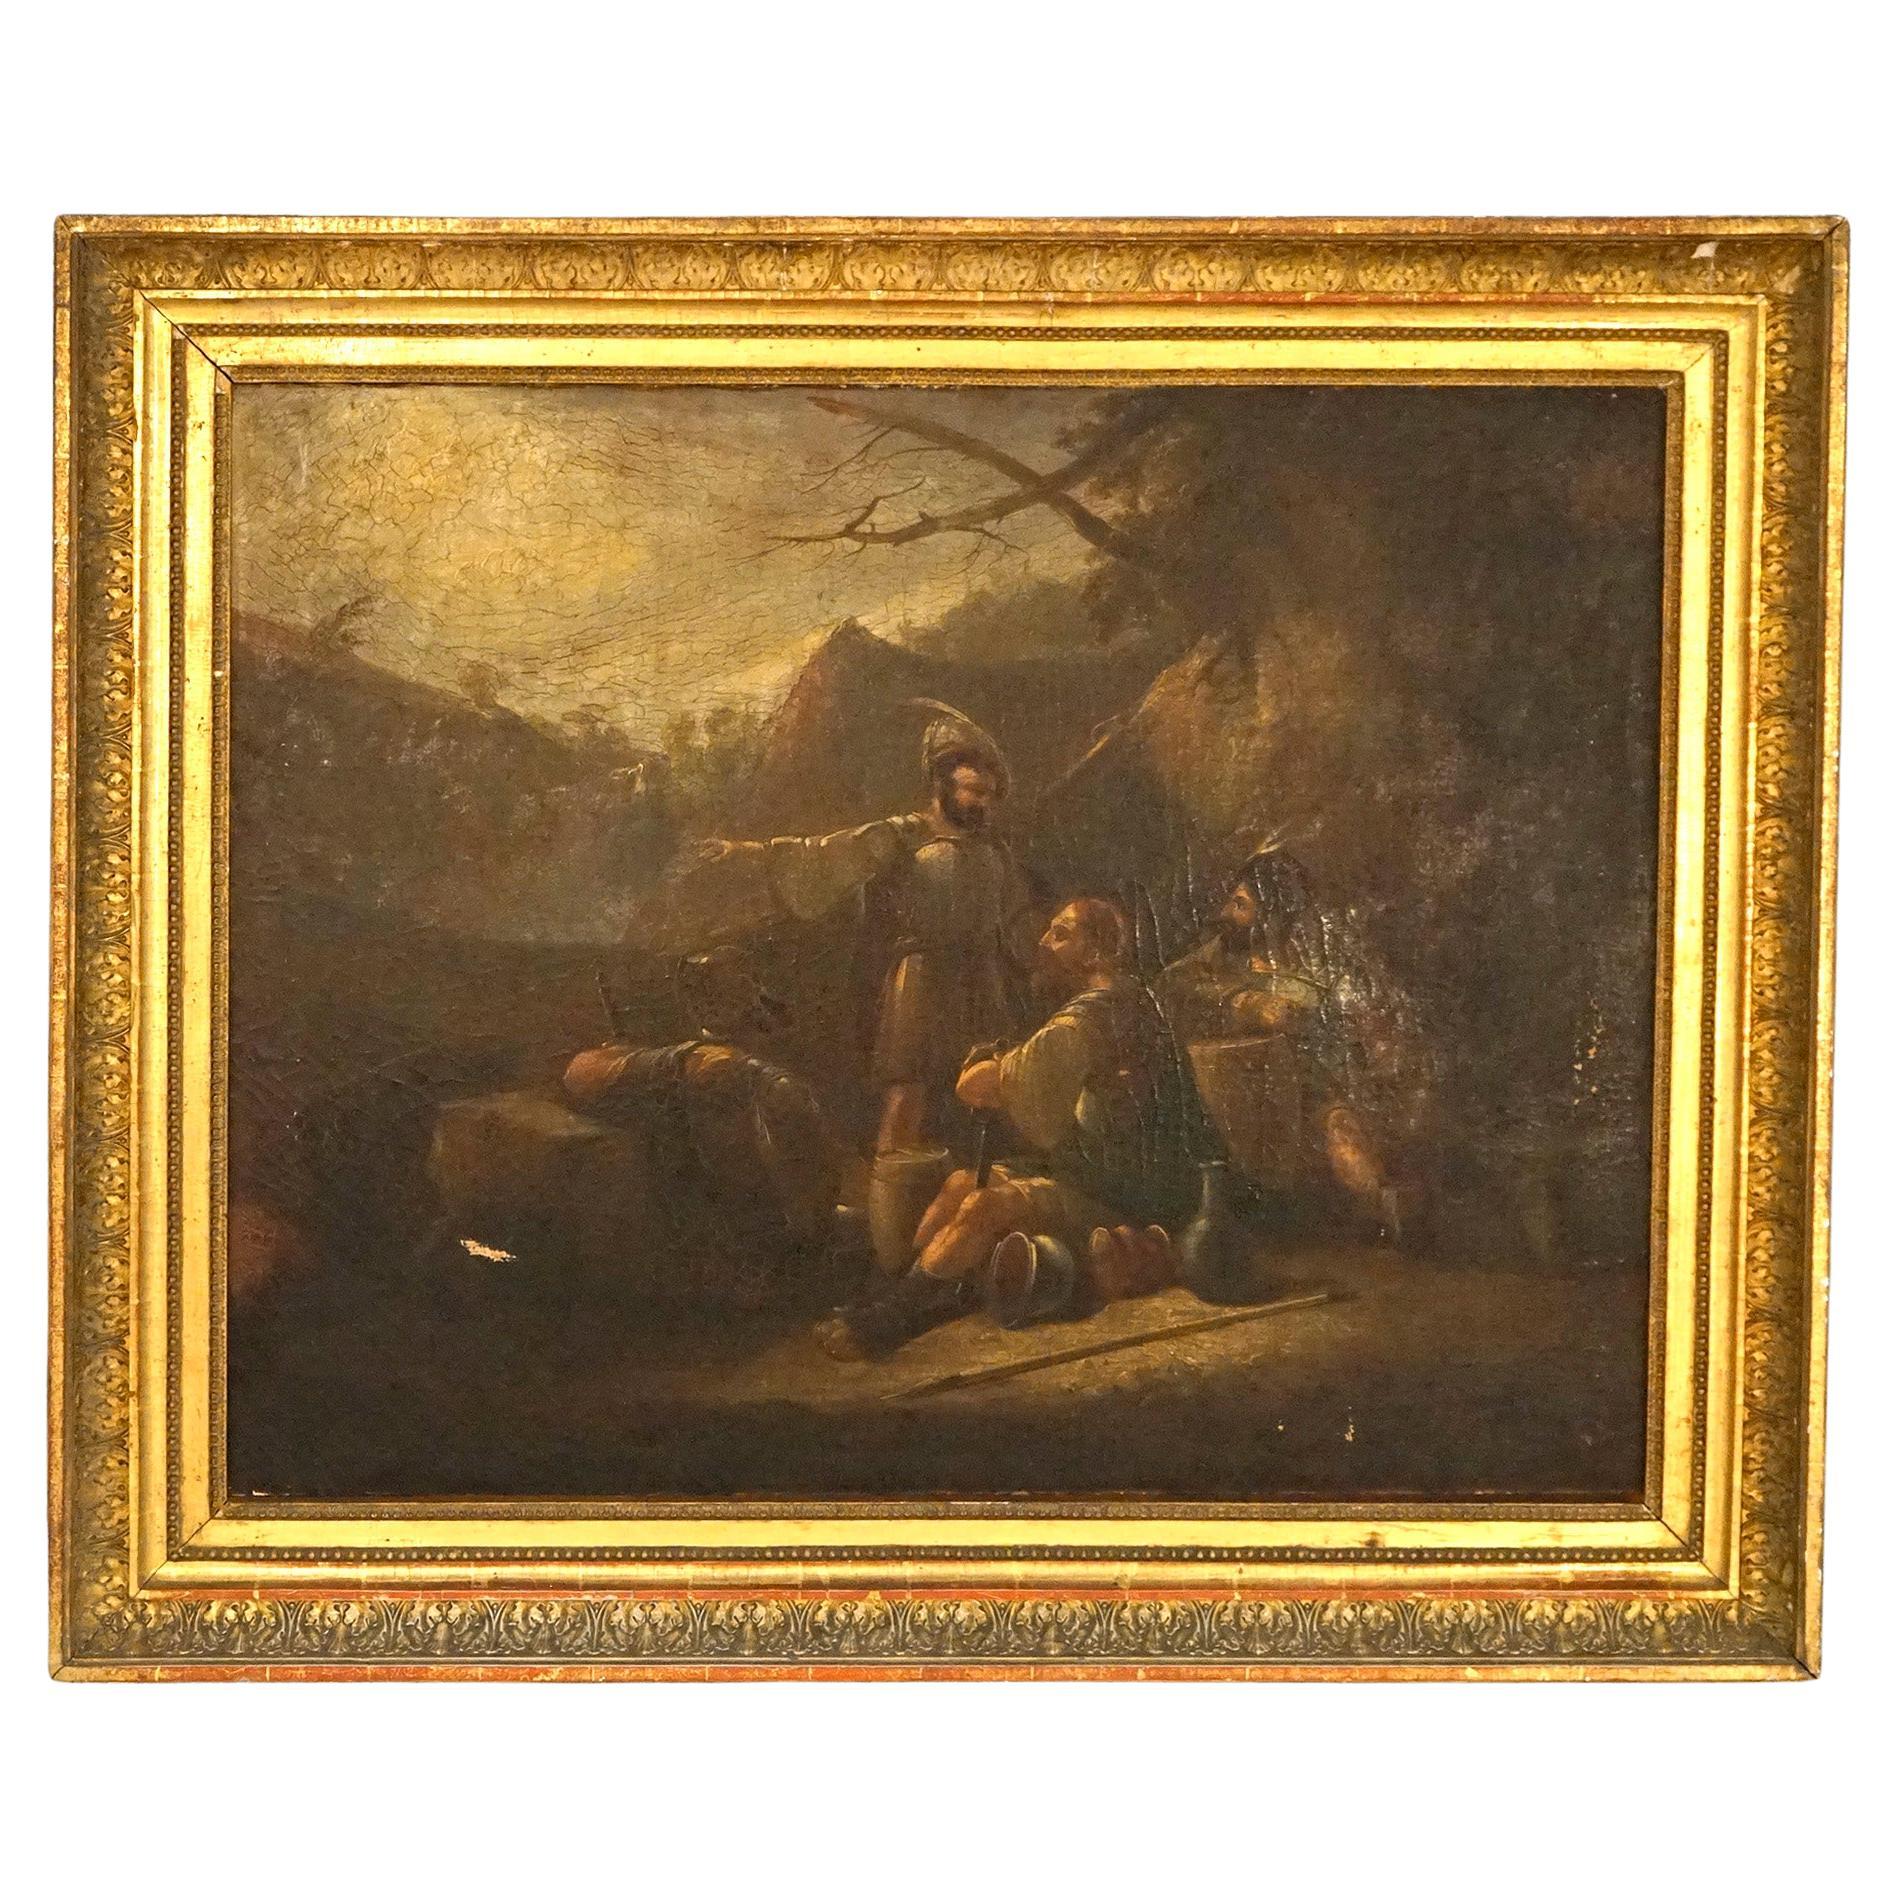 Antique Oil Painting of Three Gladiators, Old Master Copy Dated 1860